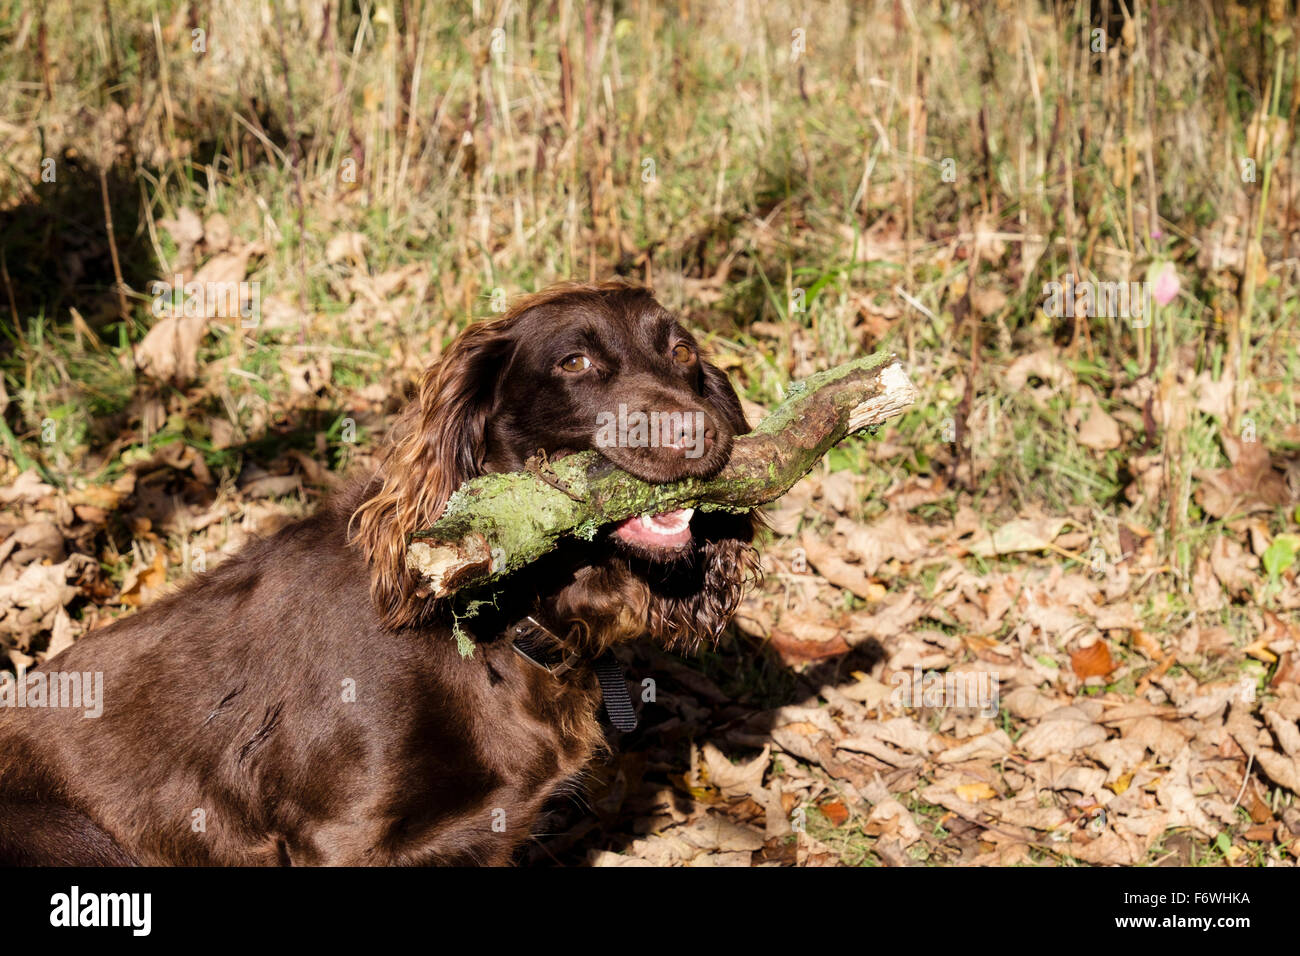 Chocolate brown (liver) English Cocker Spaniel pet dog carrying a large stick in its mouth on a country walk in woodland. UK Stock Photo